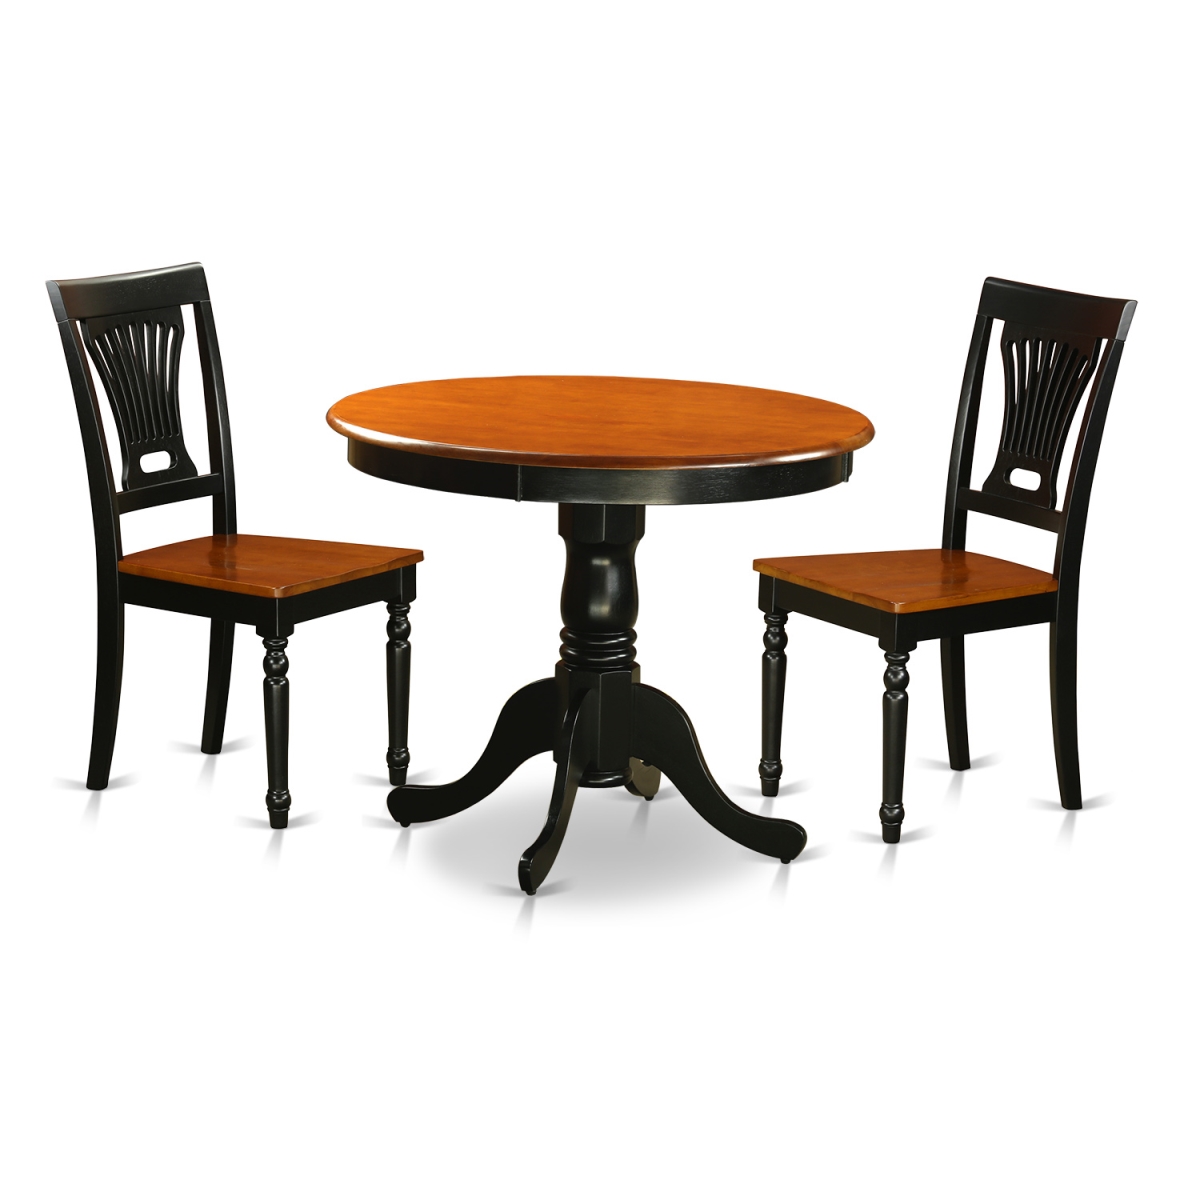 Picture of East West Furniture ANPL3-BLK-W Dining Set with 2 Wooden Chairs, Black & Cherry - 3 Piece